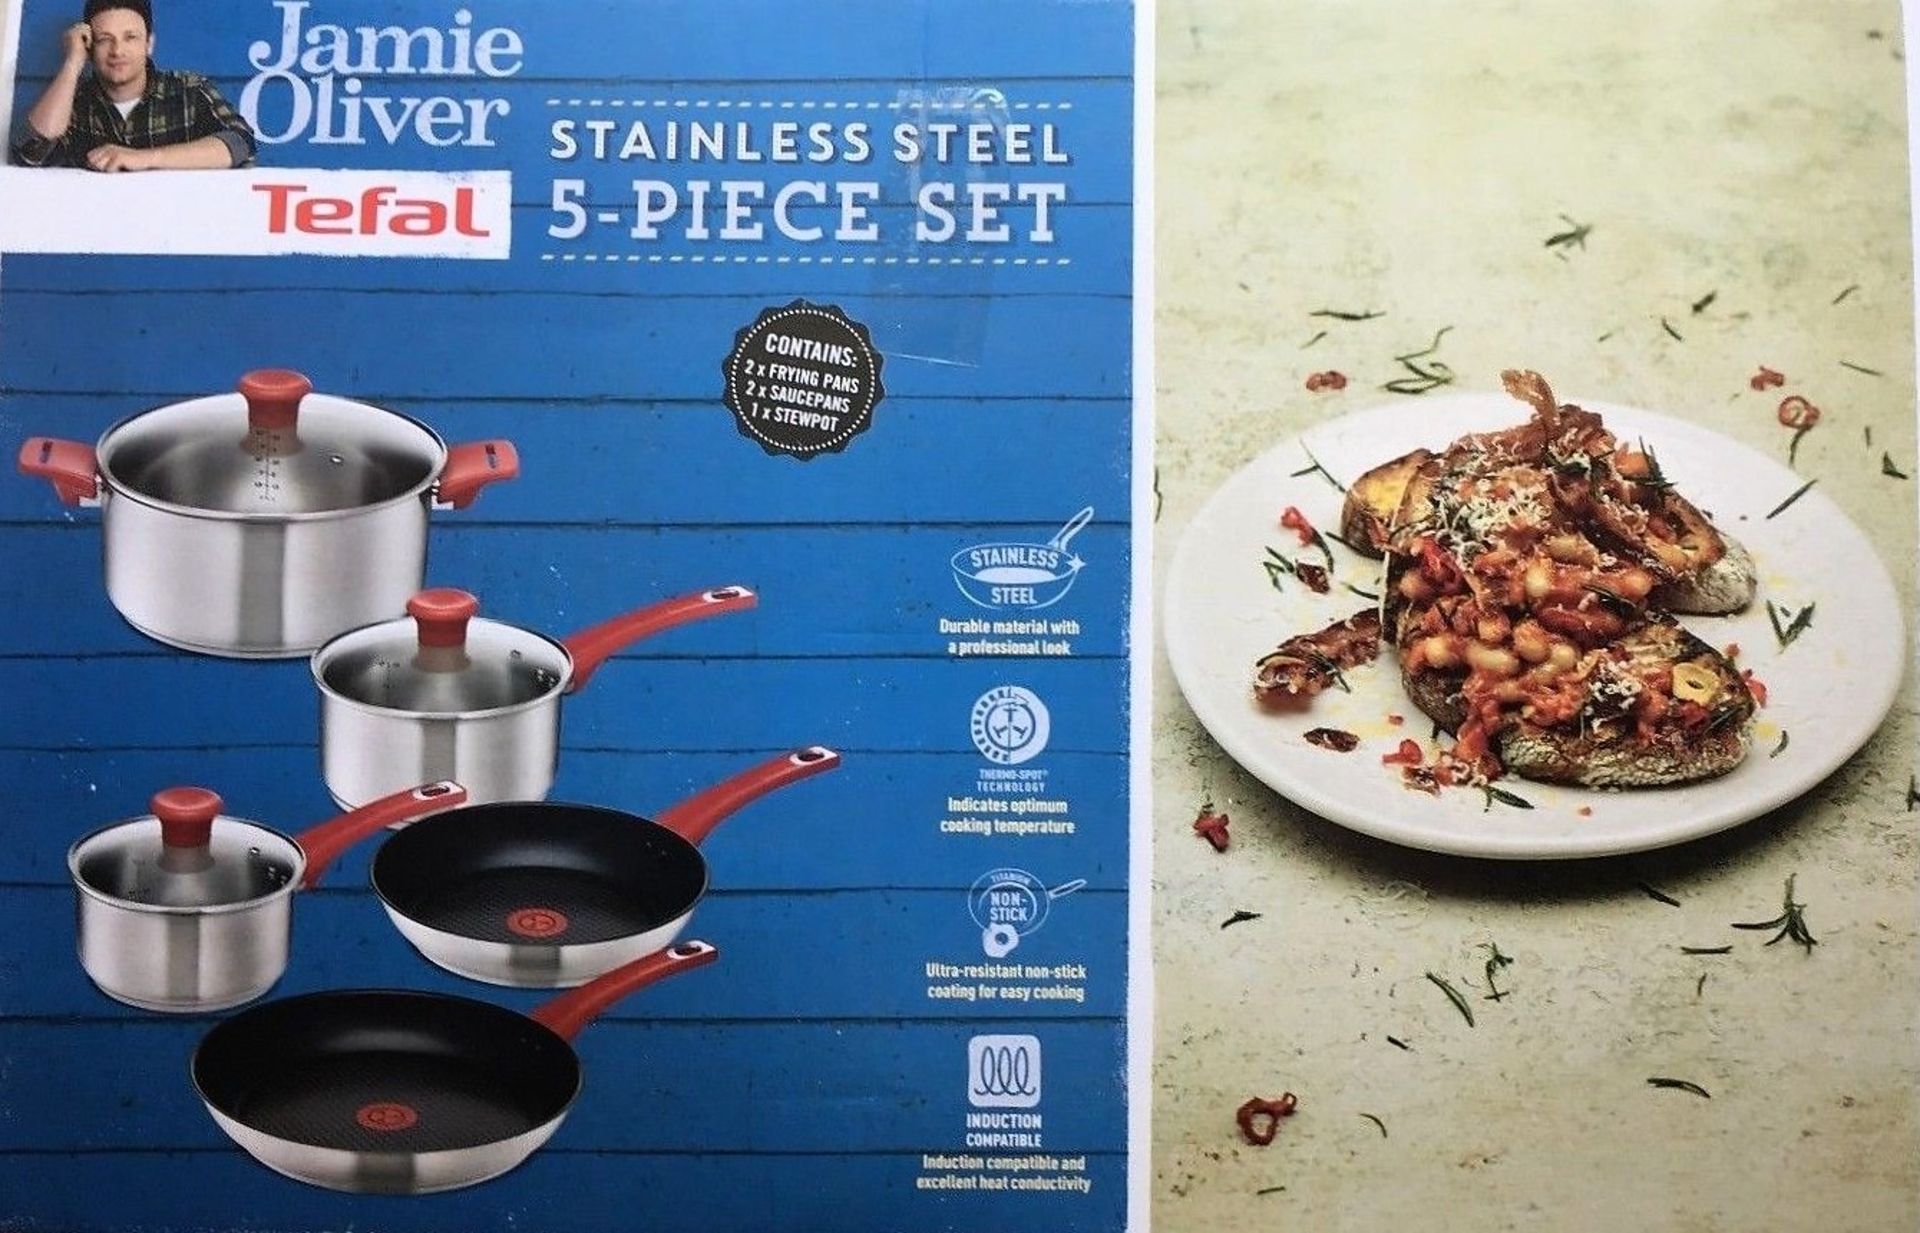 V Brand New Tefal Jamie Oliver 5 Piece Stainless Steel Set - £149.99 at Currys - Contains 2 x Frying - Image 2 of 2